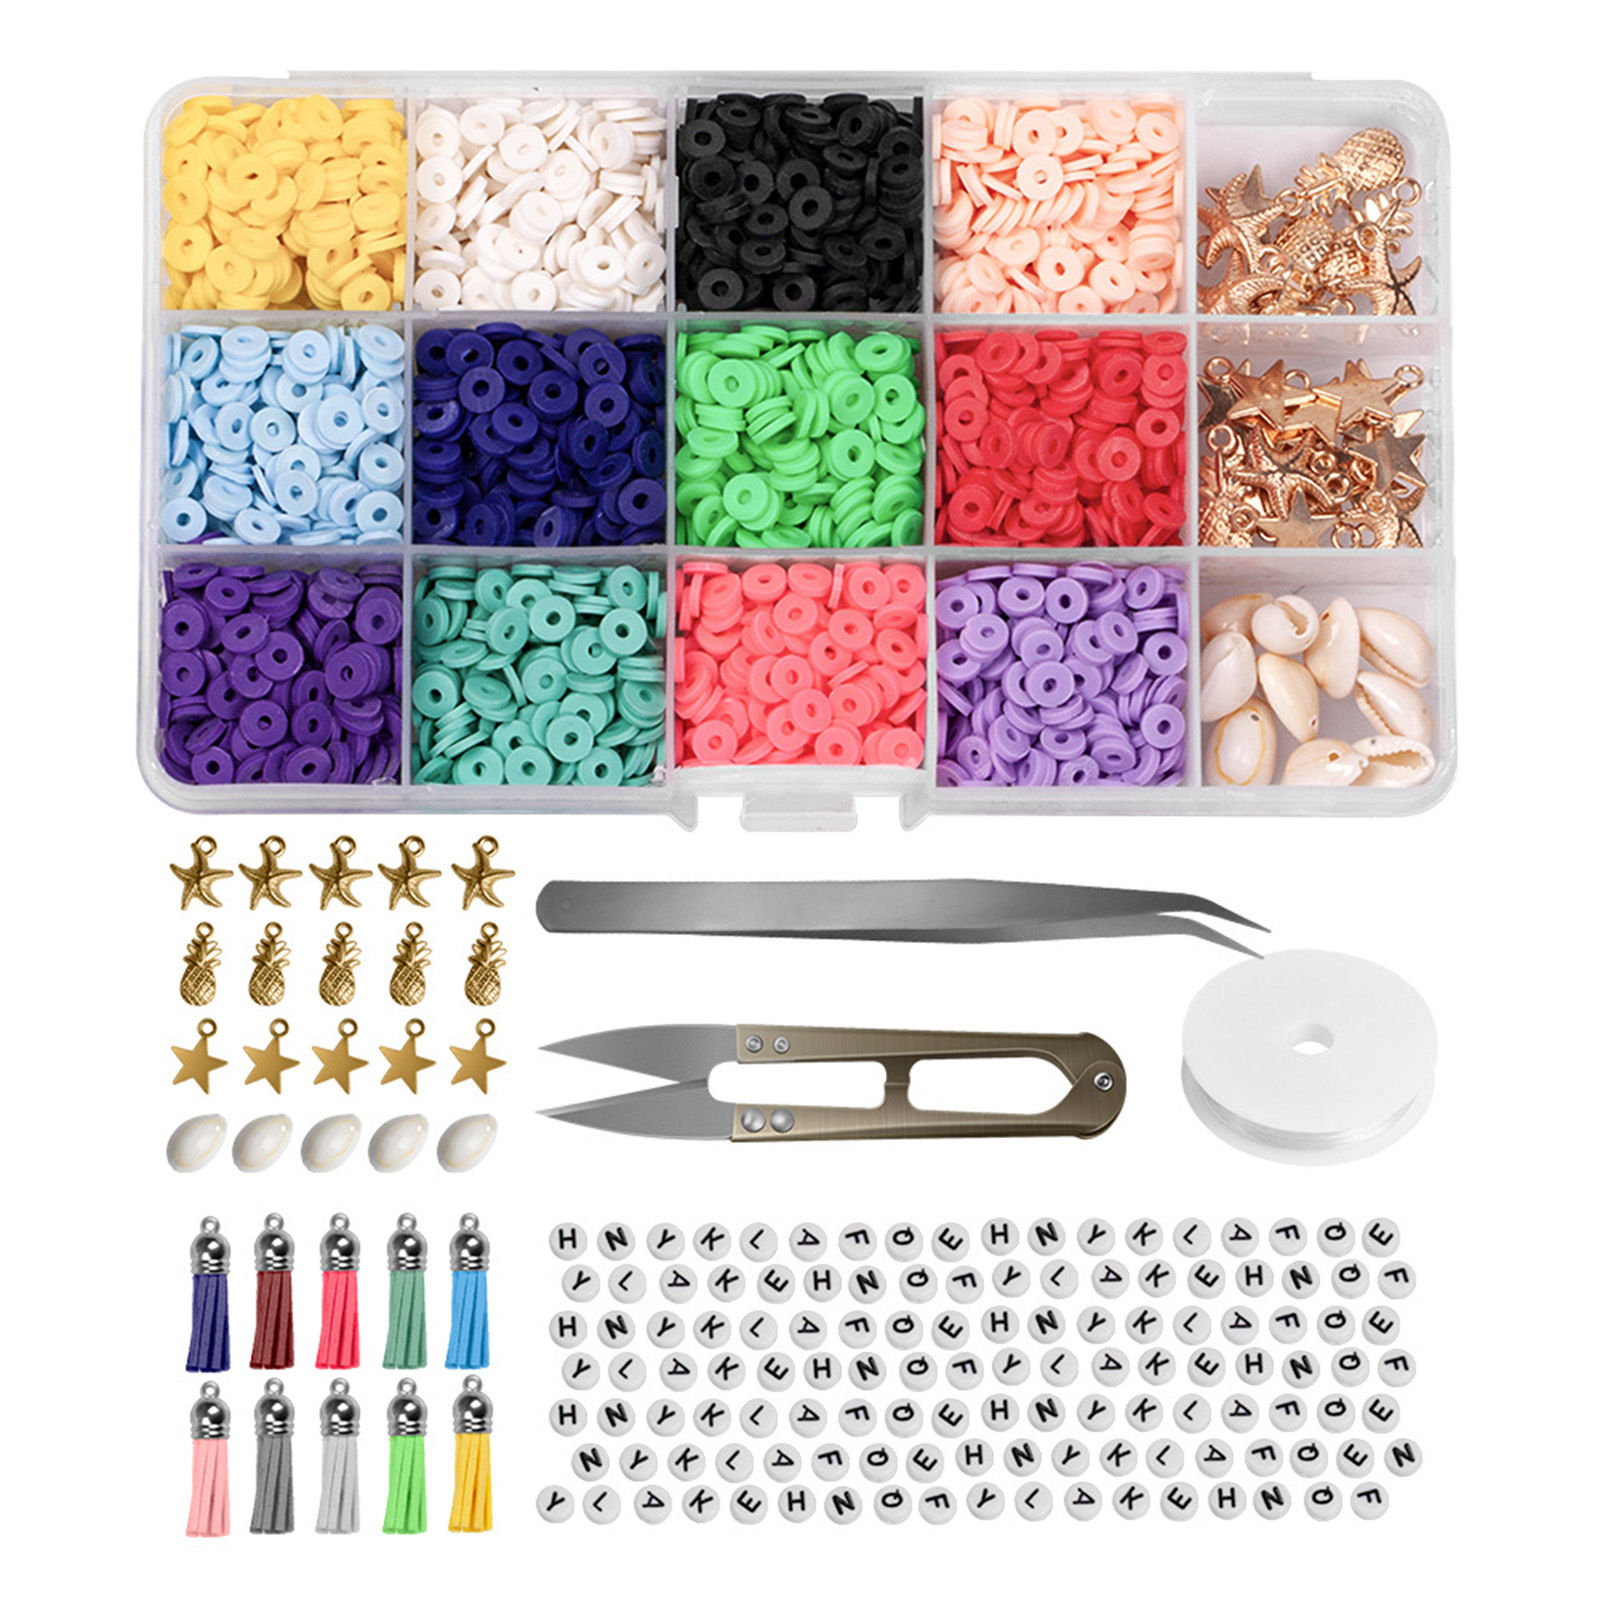 Picture of Polymer Clay Beads DIY Handmade Craft Materials Accessories With Tools Multicolor 17.5cm x 13cm, 1 Set